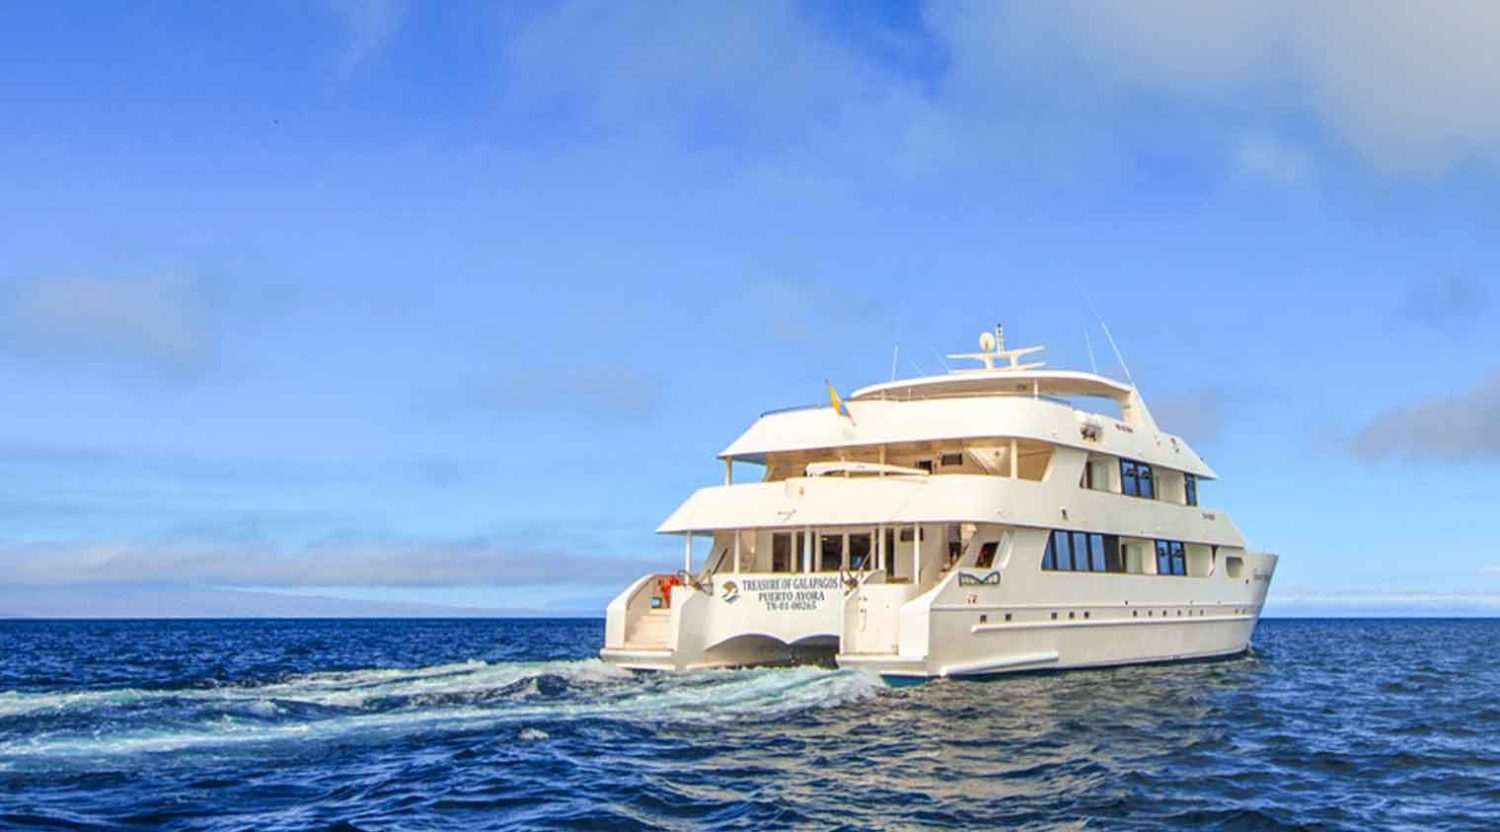 aerial photo of treasure of galapagos yacht of galapagos islands tours